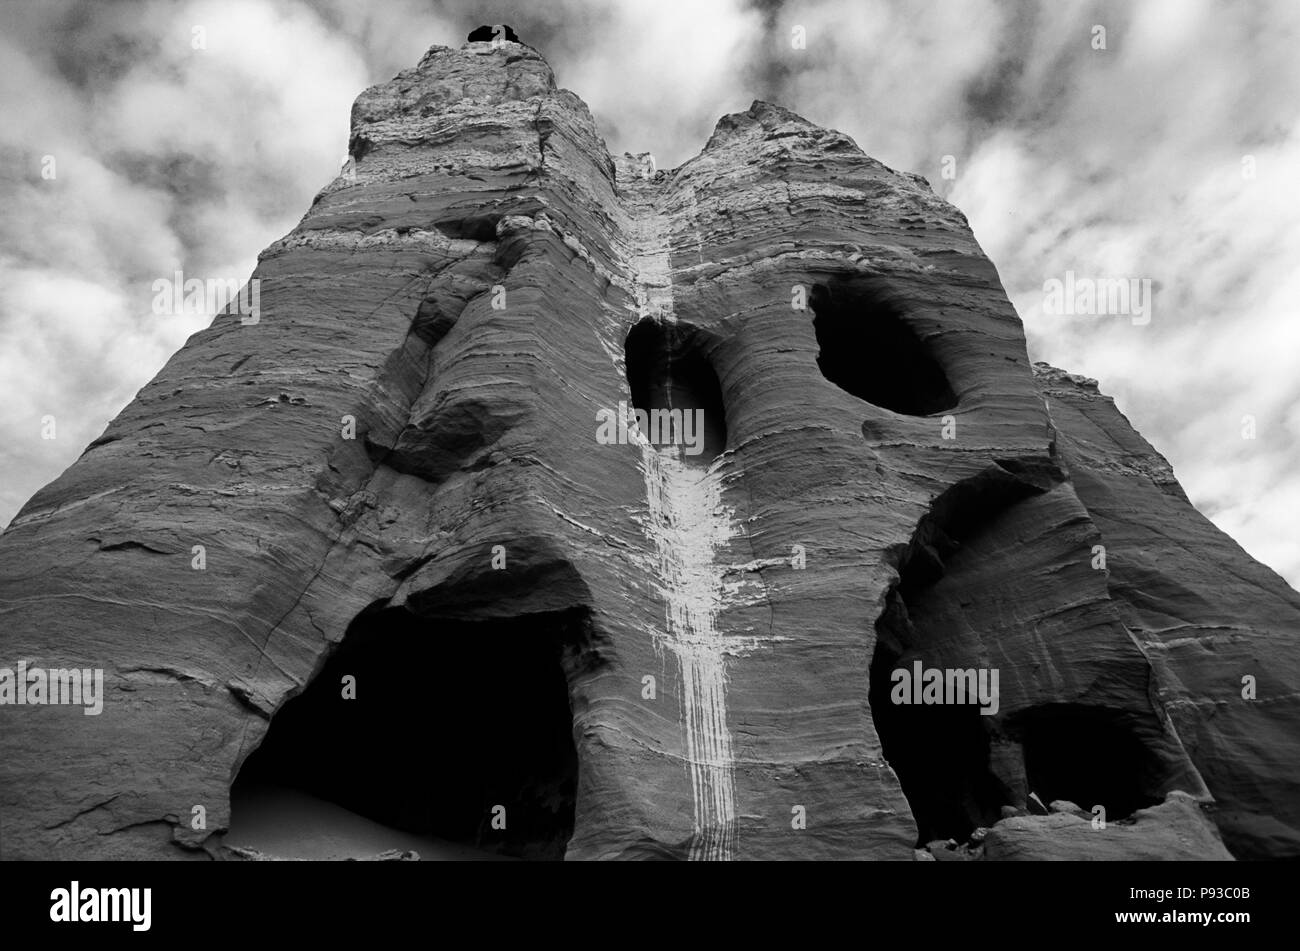 Multilevel CAVE DWELLINGS near THOLING date back to the 10th C. in the GUGE KINGDOM west of KAILASH - TIBET Stock Photo